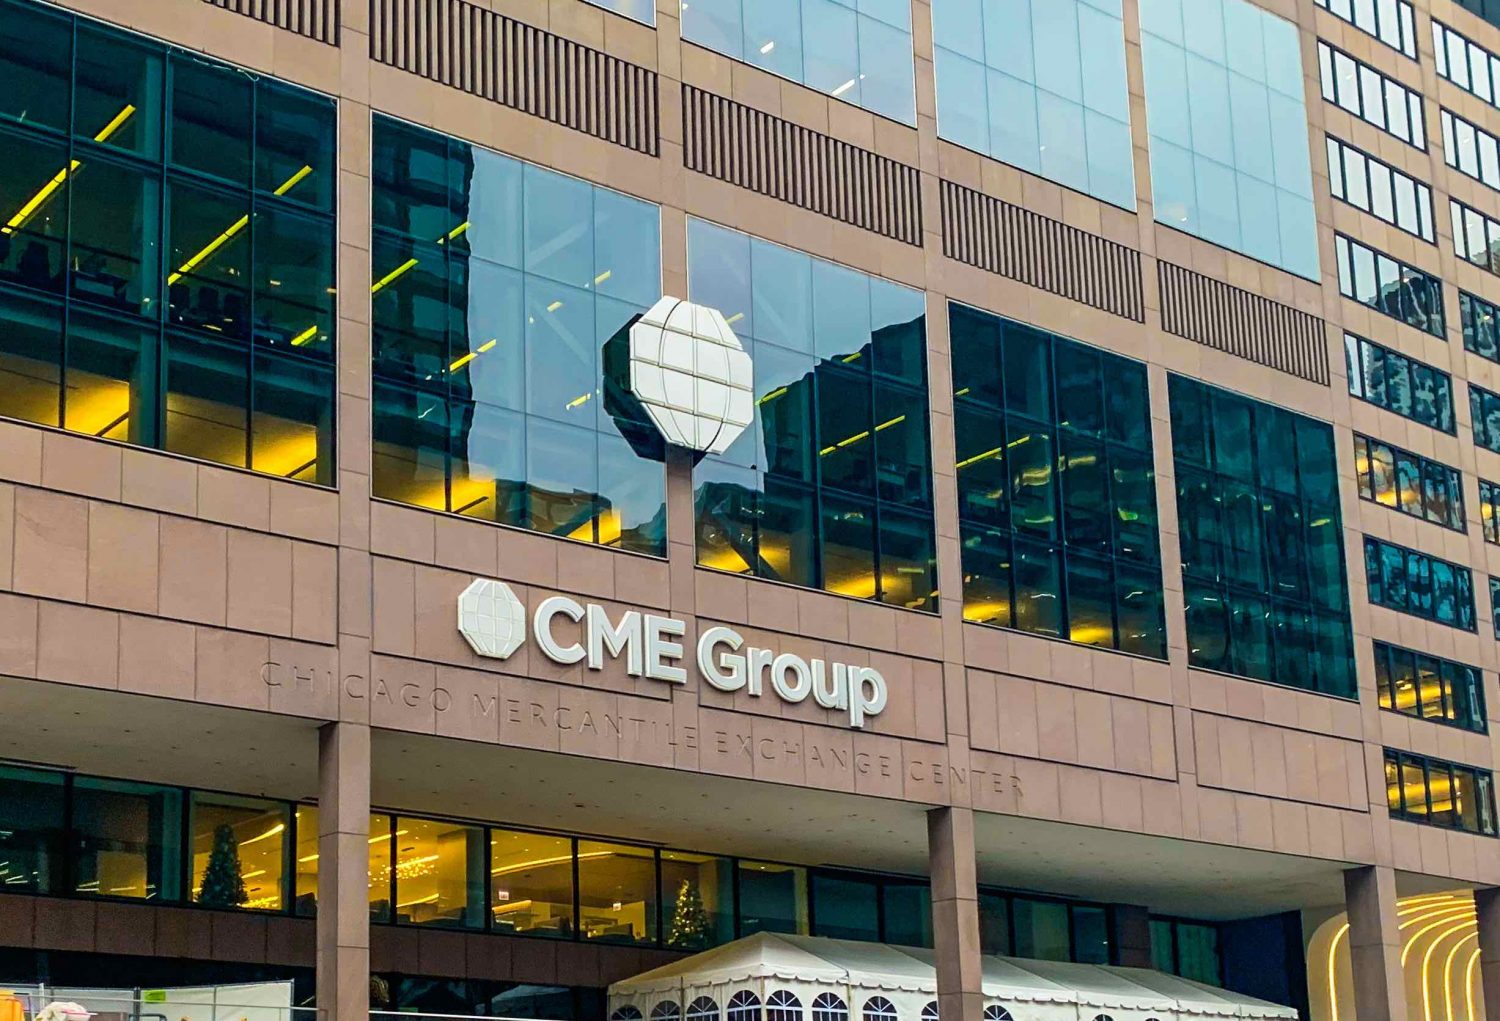 Cme-open-interest-for-bitcoin-futures-up-100%-since-start-of-2020